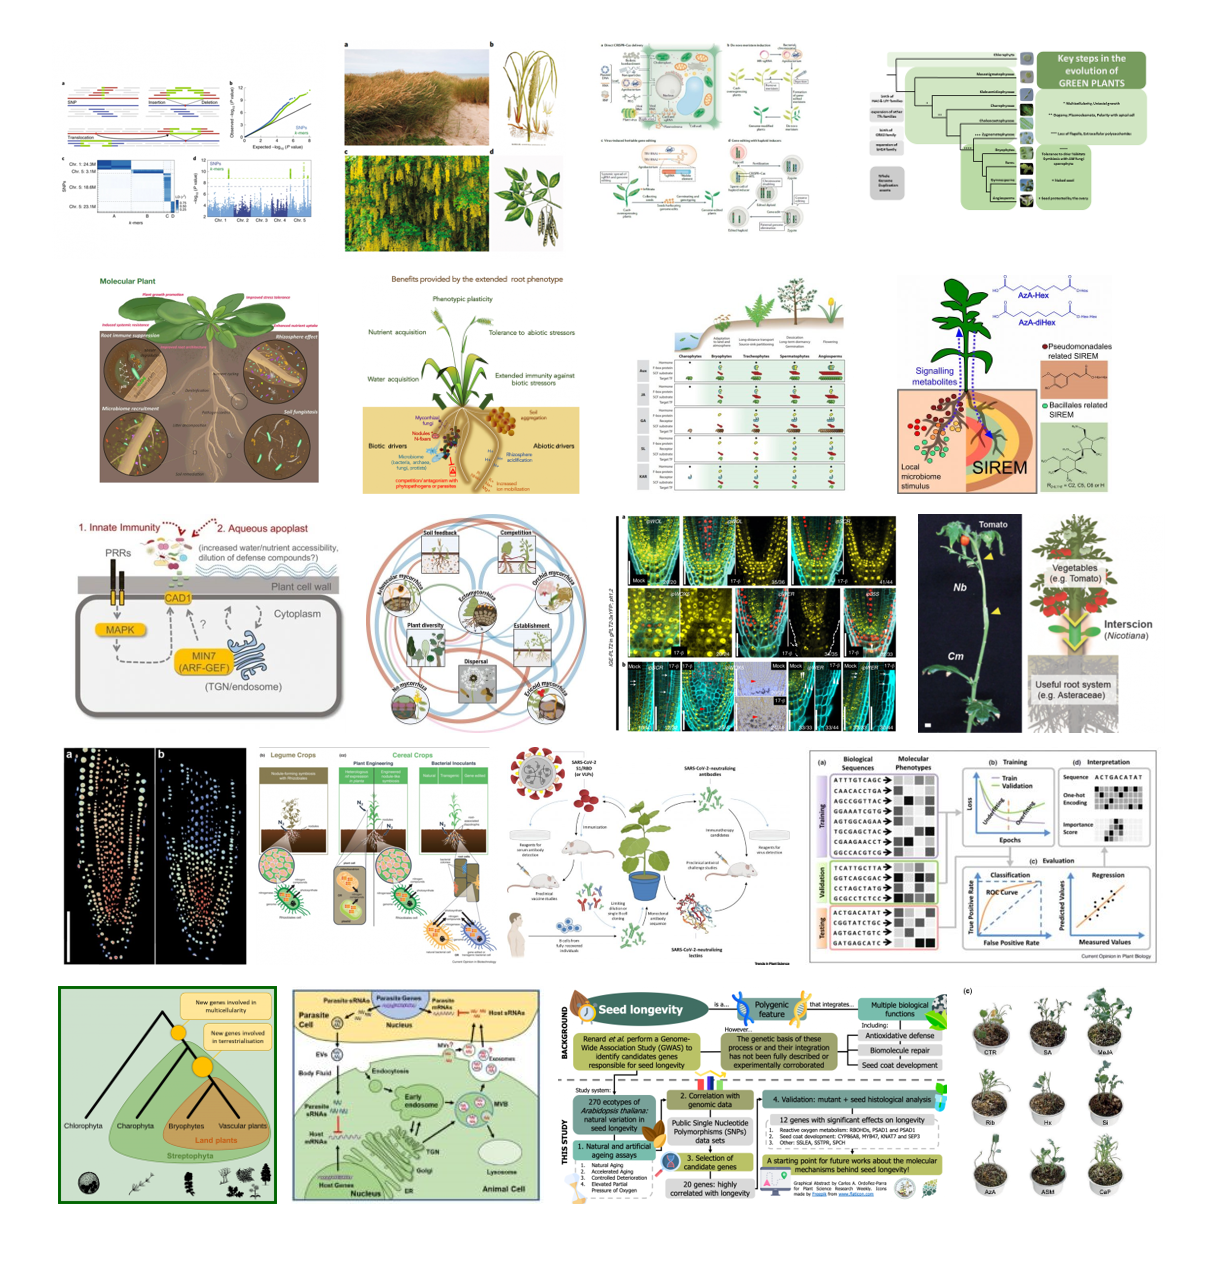 research on plant sciences